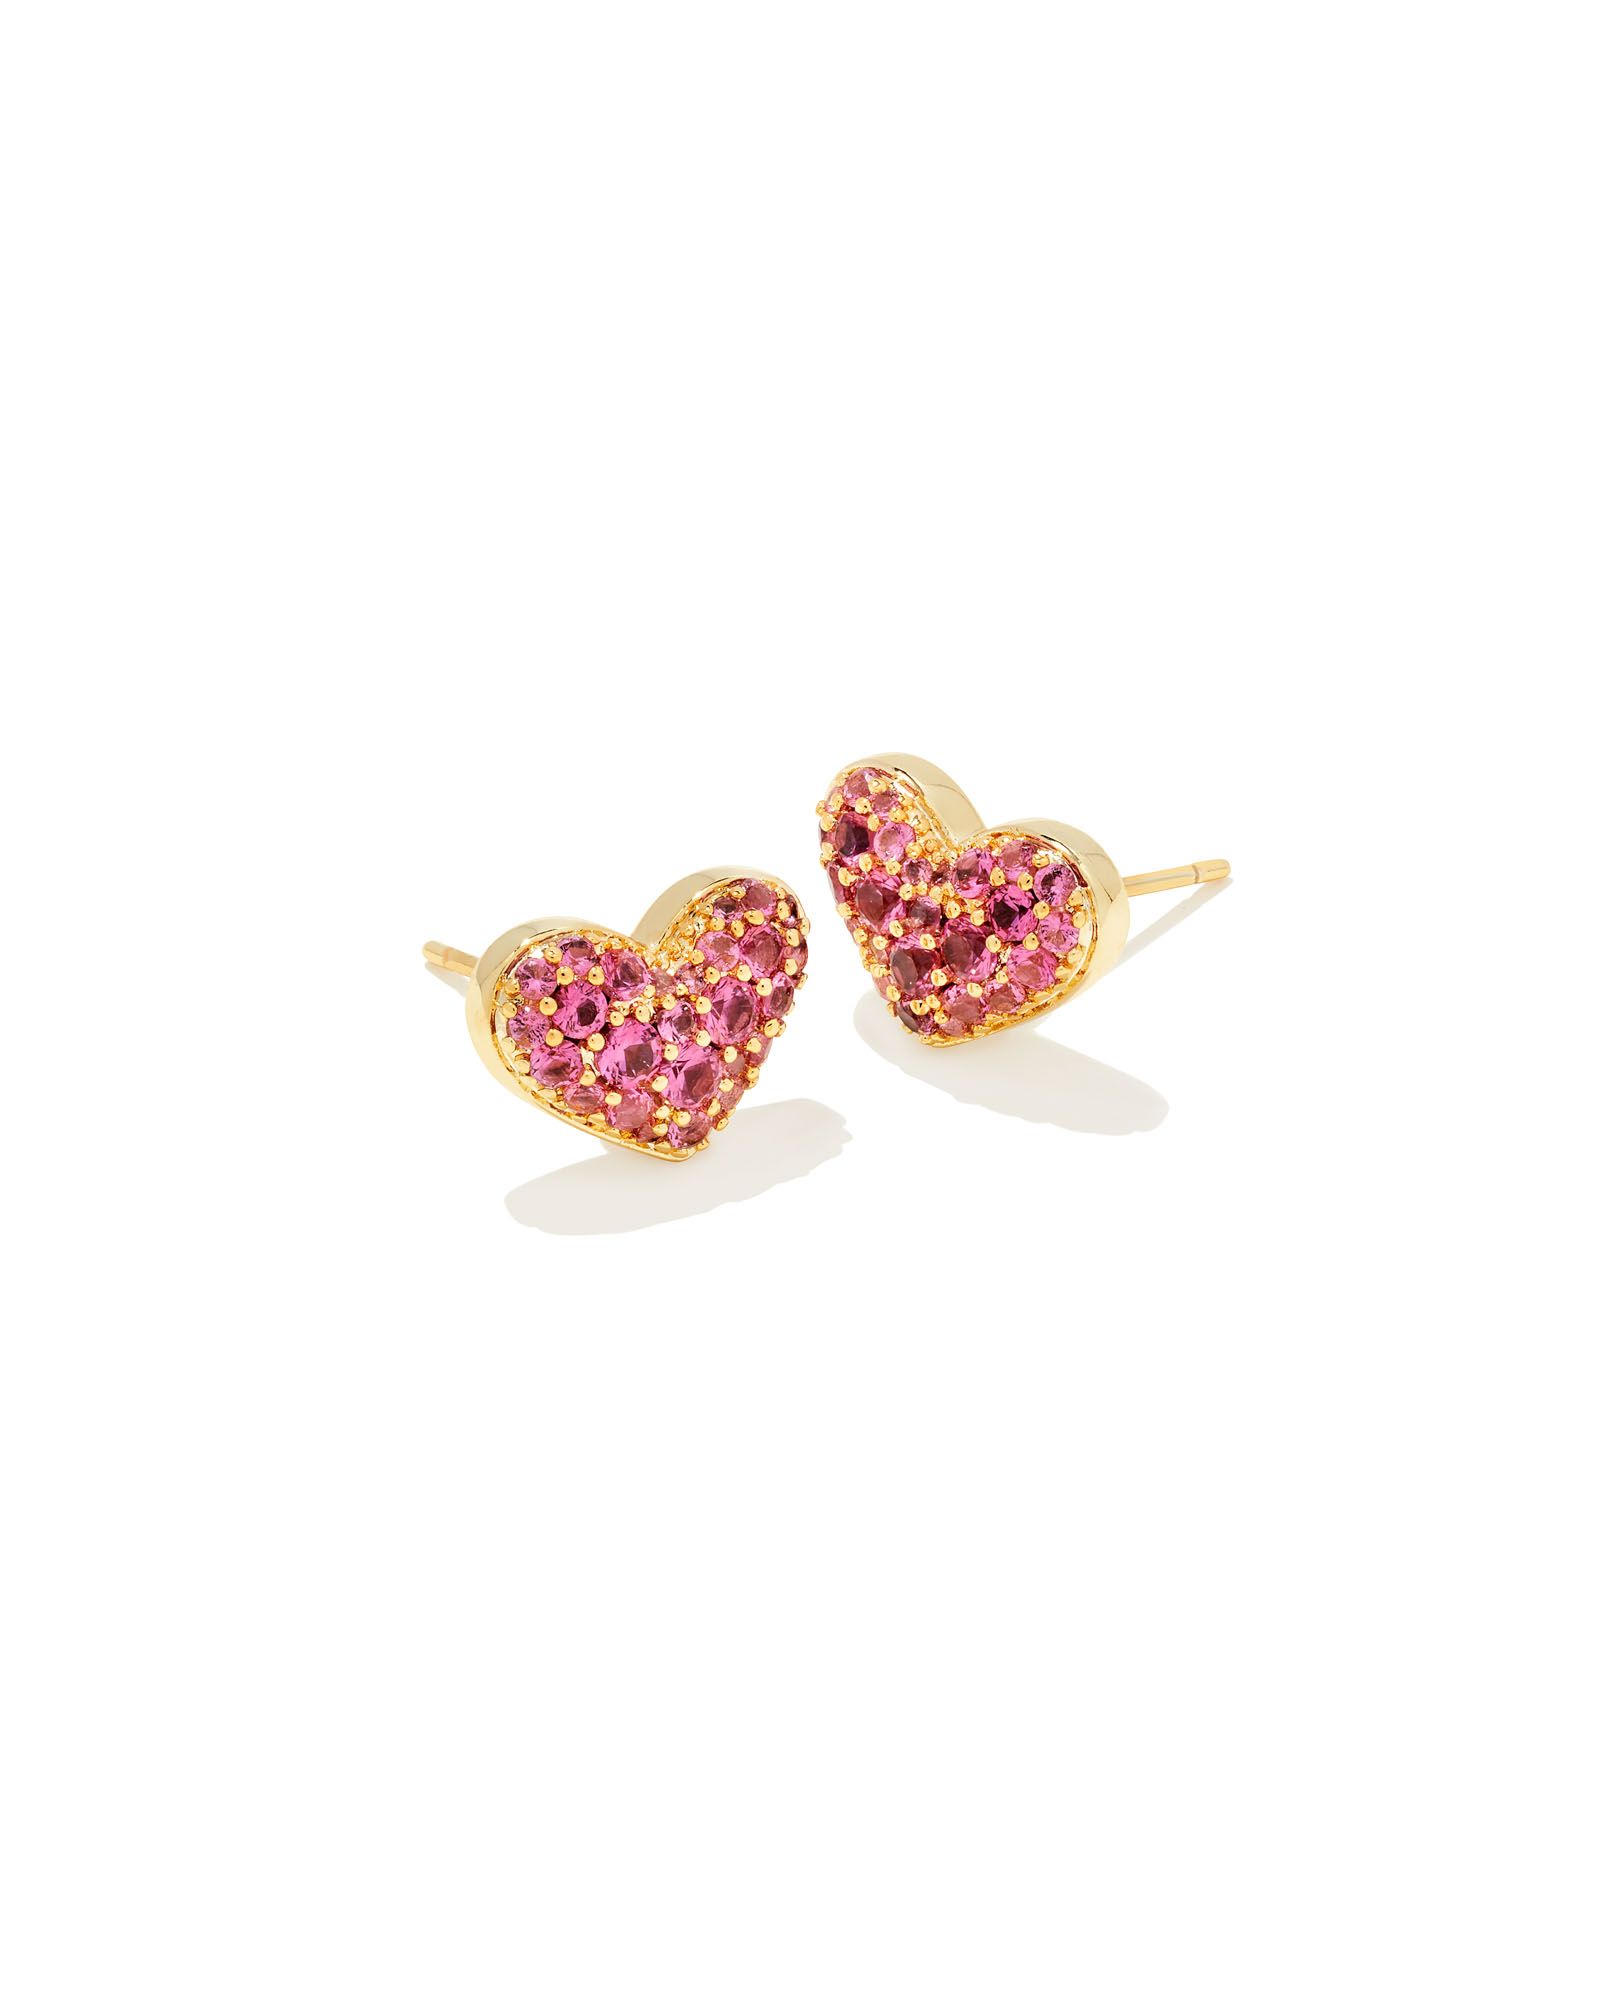 Ari Gold Pave Crystal Heart Earrings in Pink Crystal | Kendra Scott